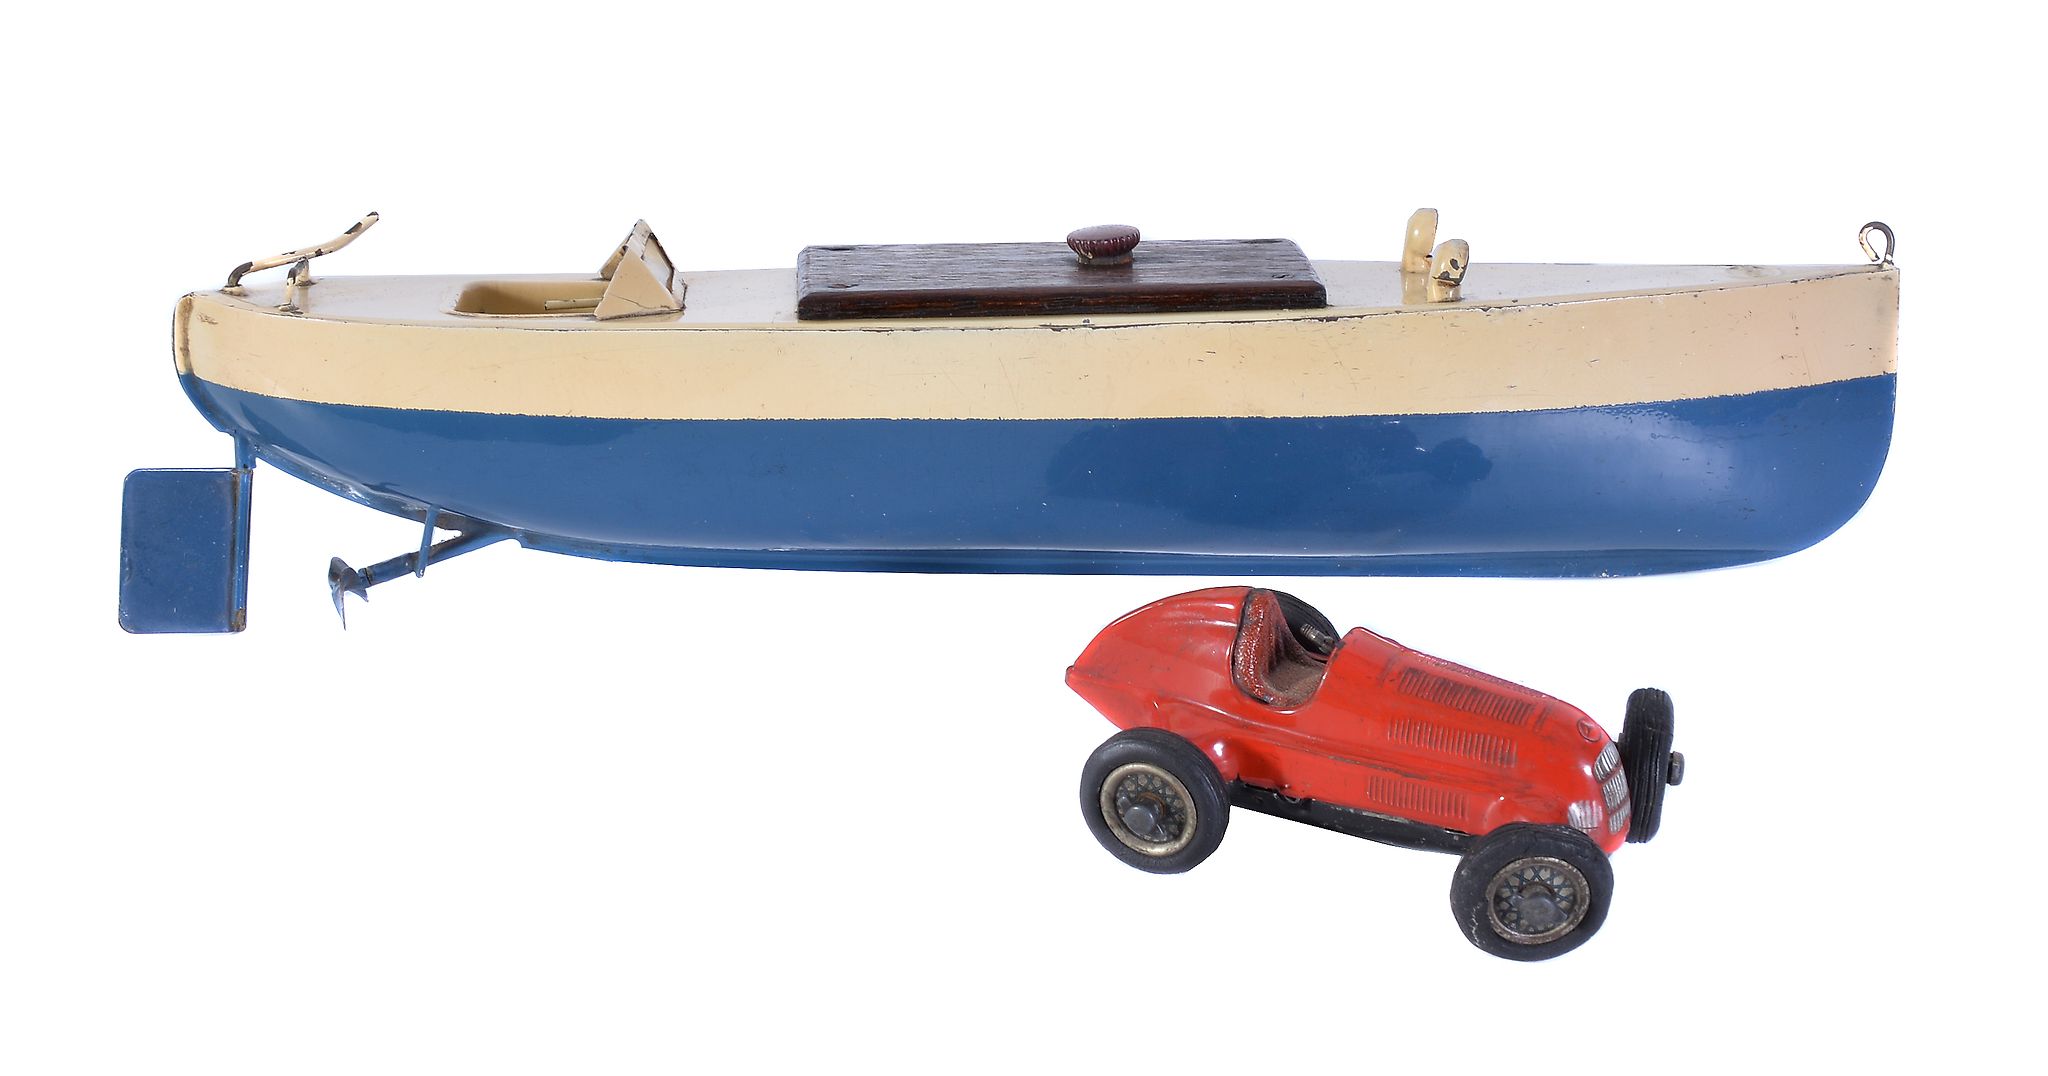 A model of a Sutcliffe clockwork toy motor boat, circa 1934 and a Shuco studio toy racing car.